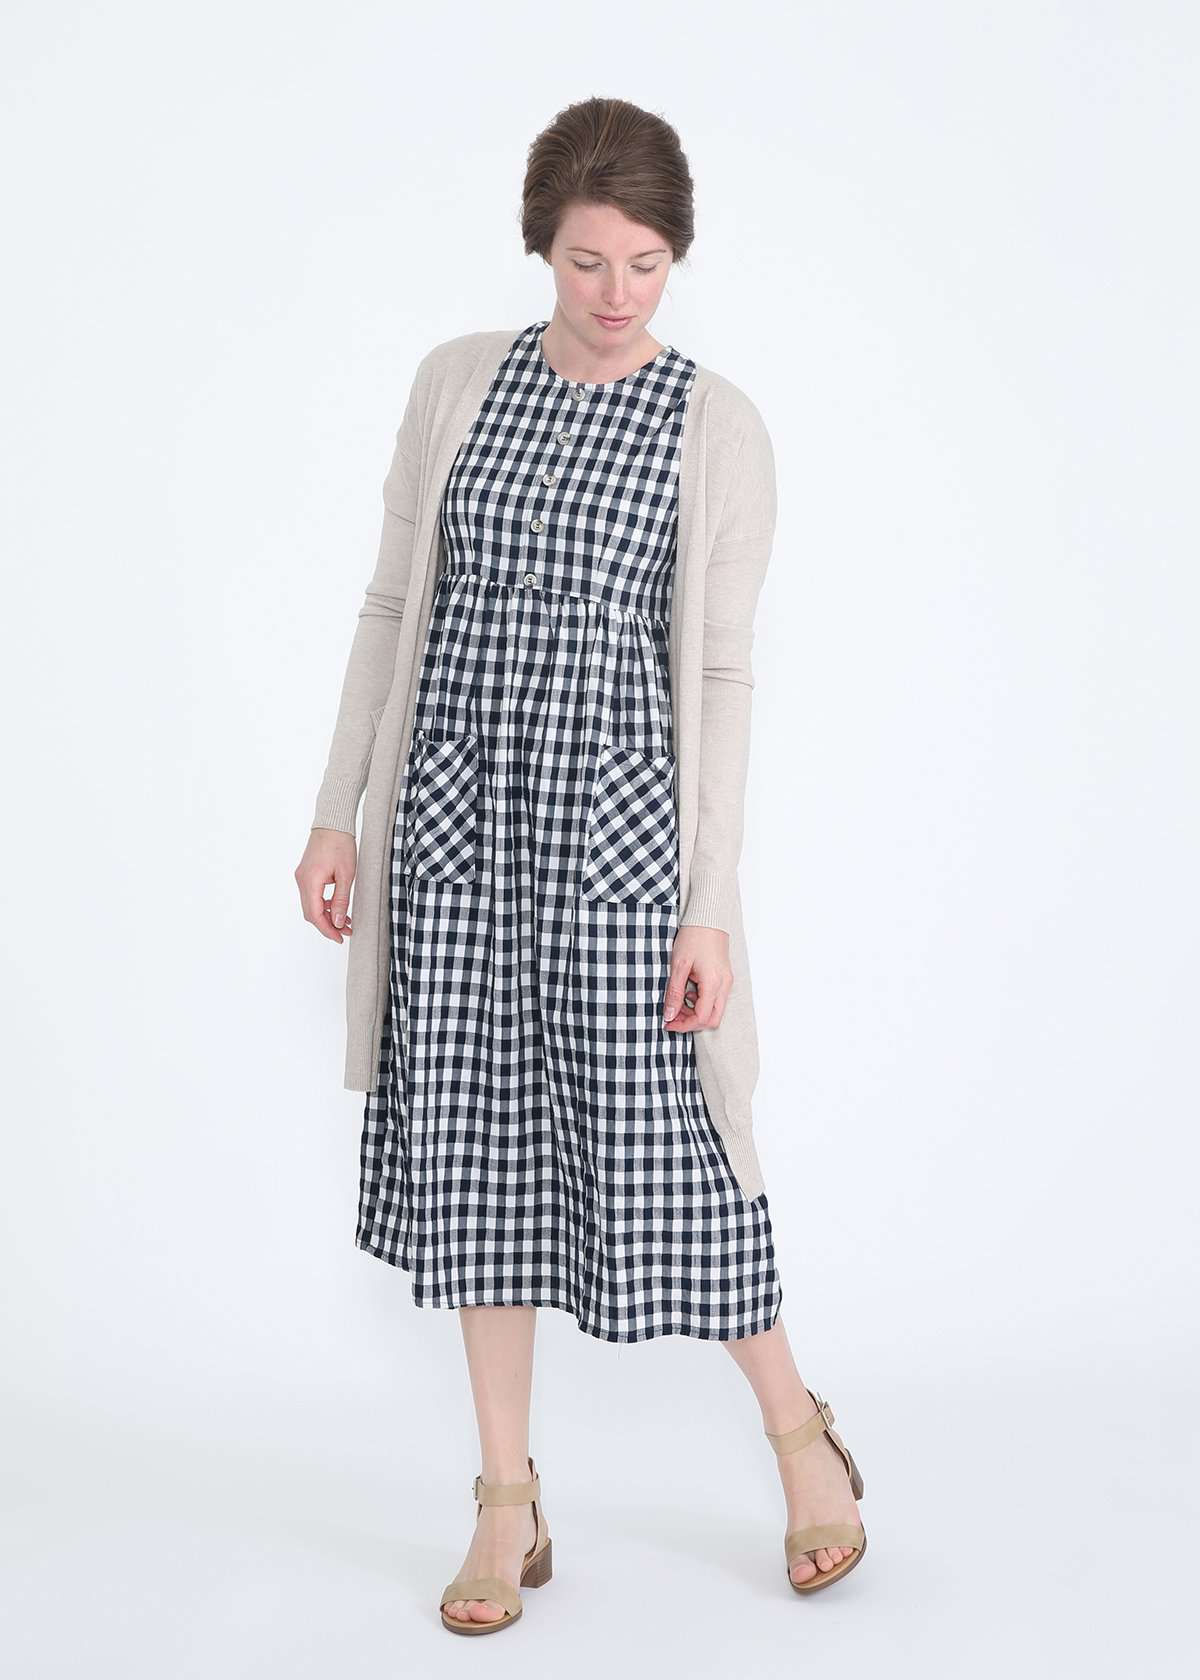 woman wearing a navy and white gingham print midi dress